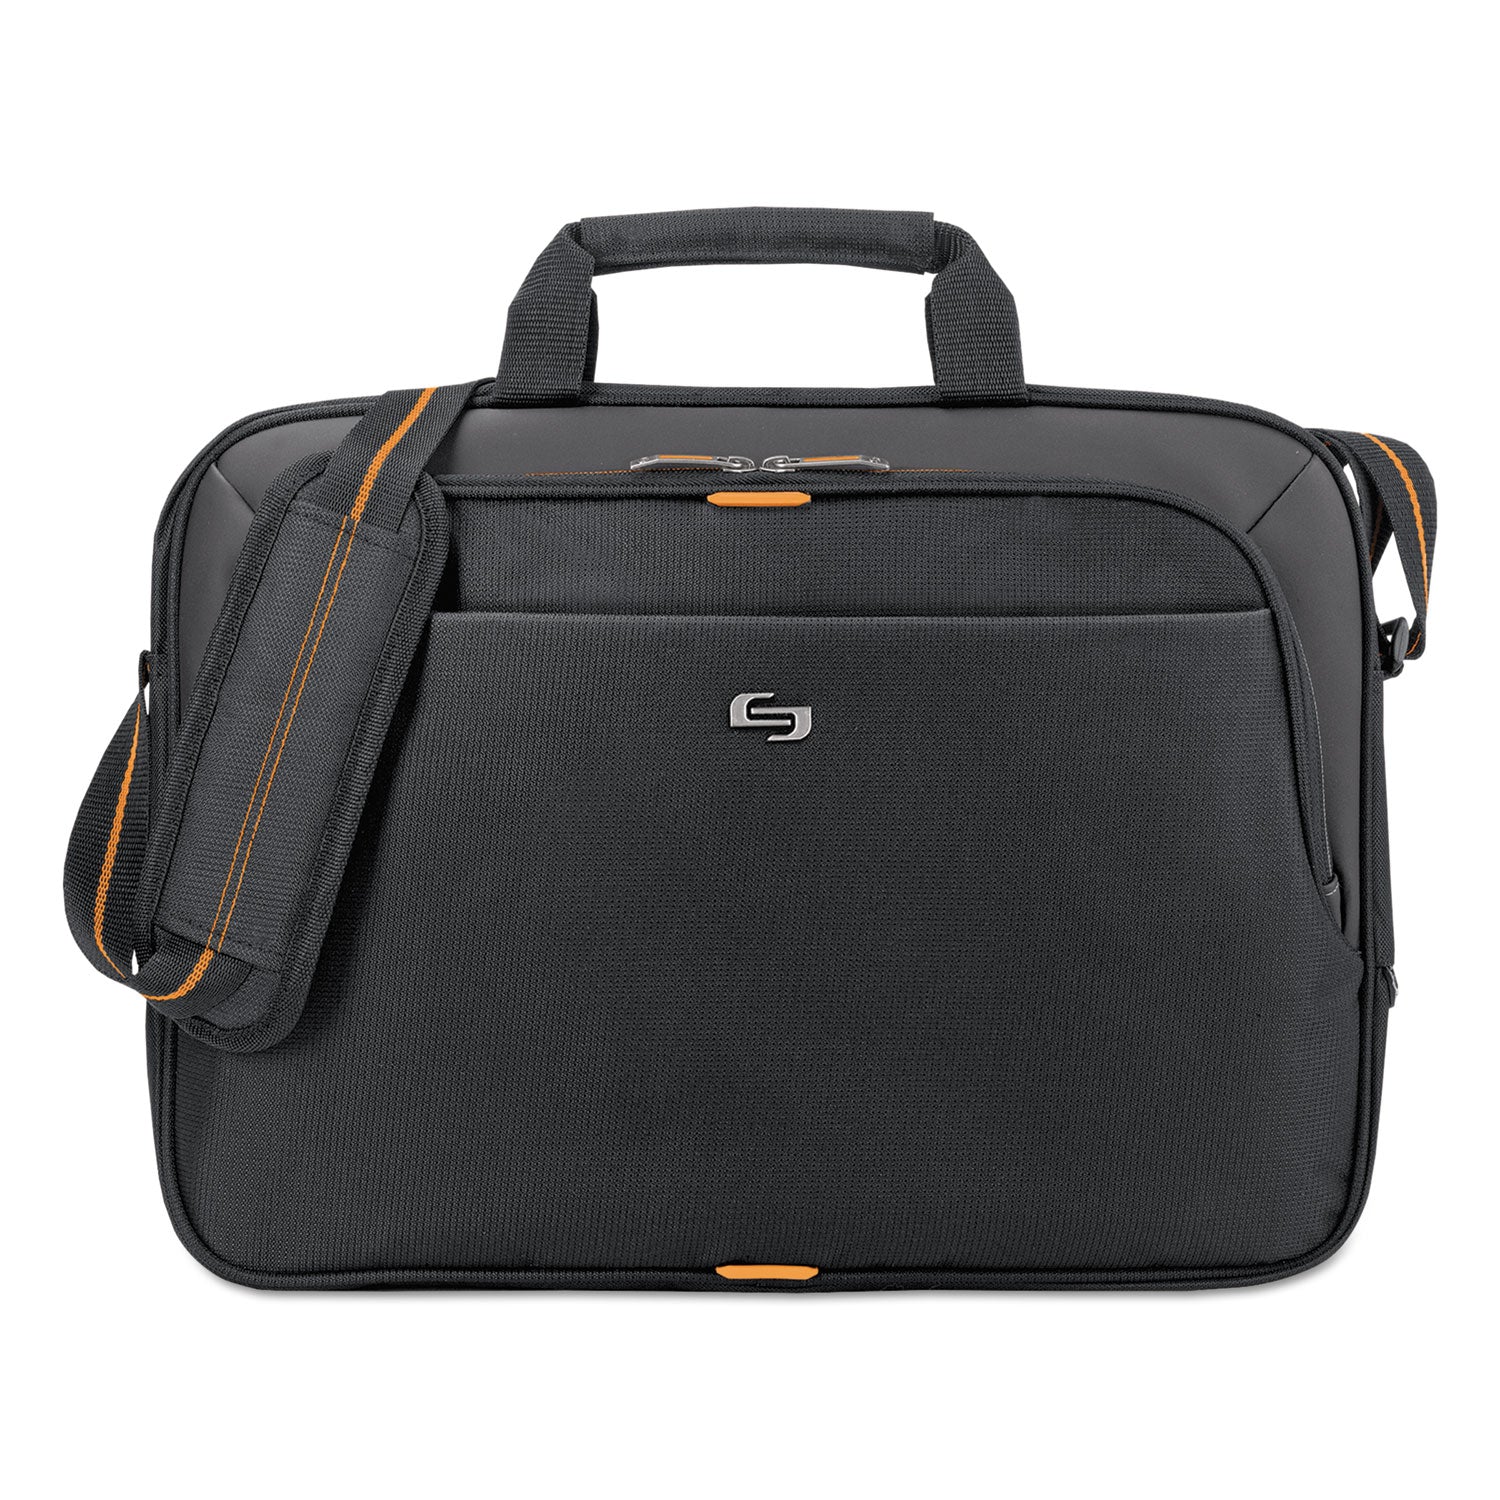 Urban Slim Brief, Fits Devices Up to 15.6", Polyester, 16.5 x 2 x 11.75, Black - 